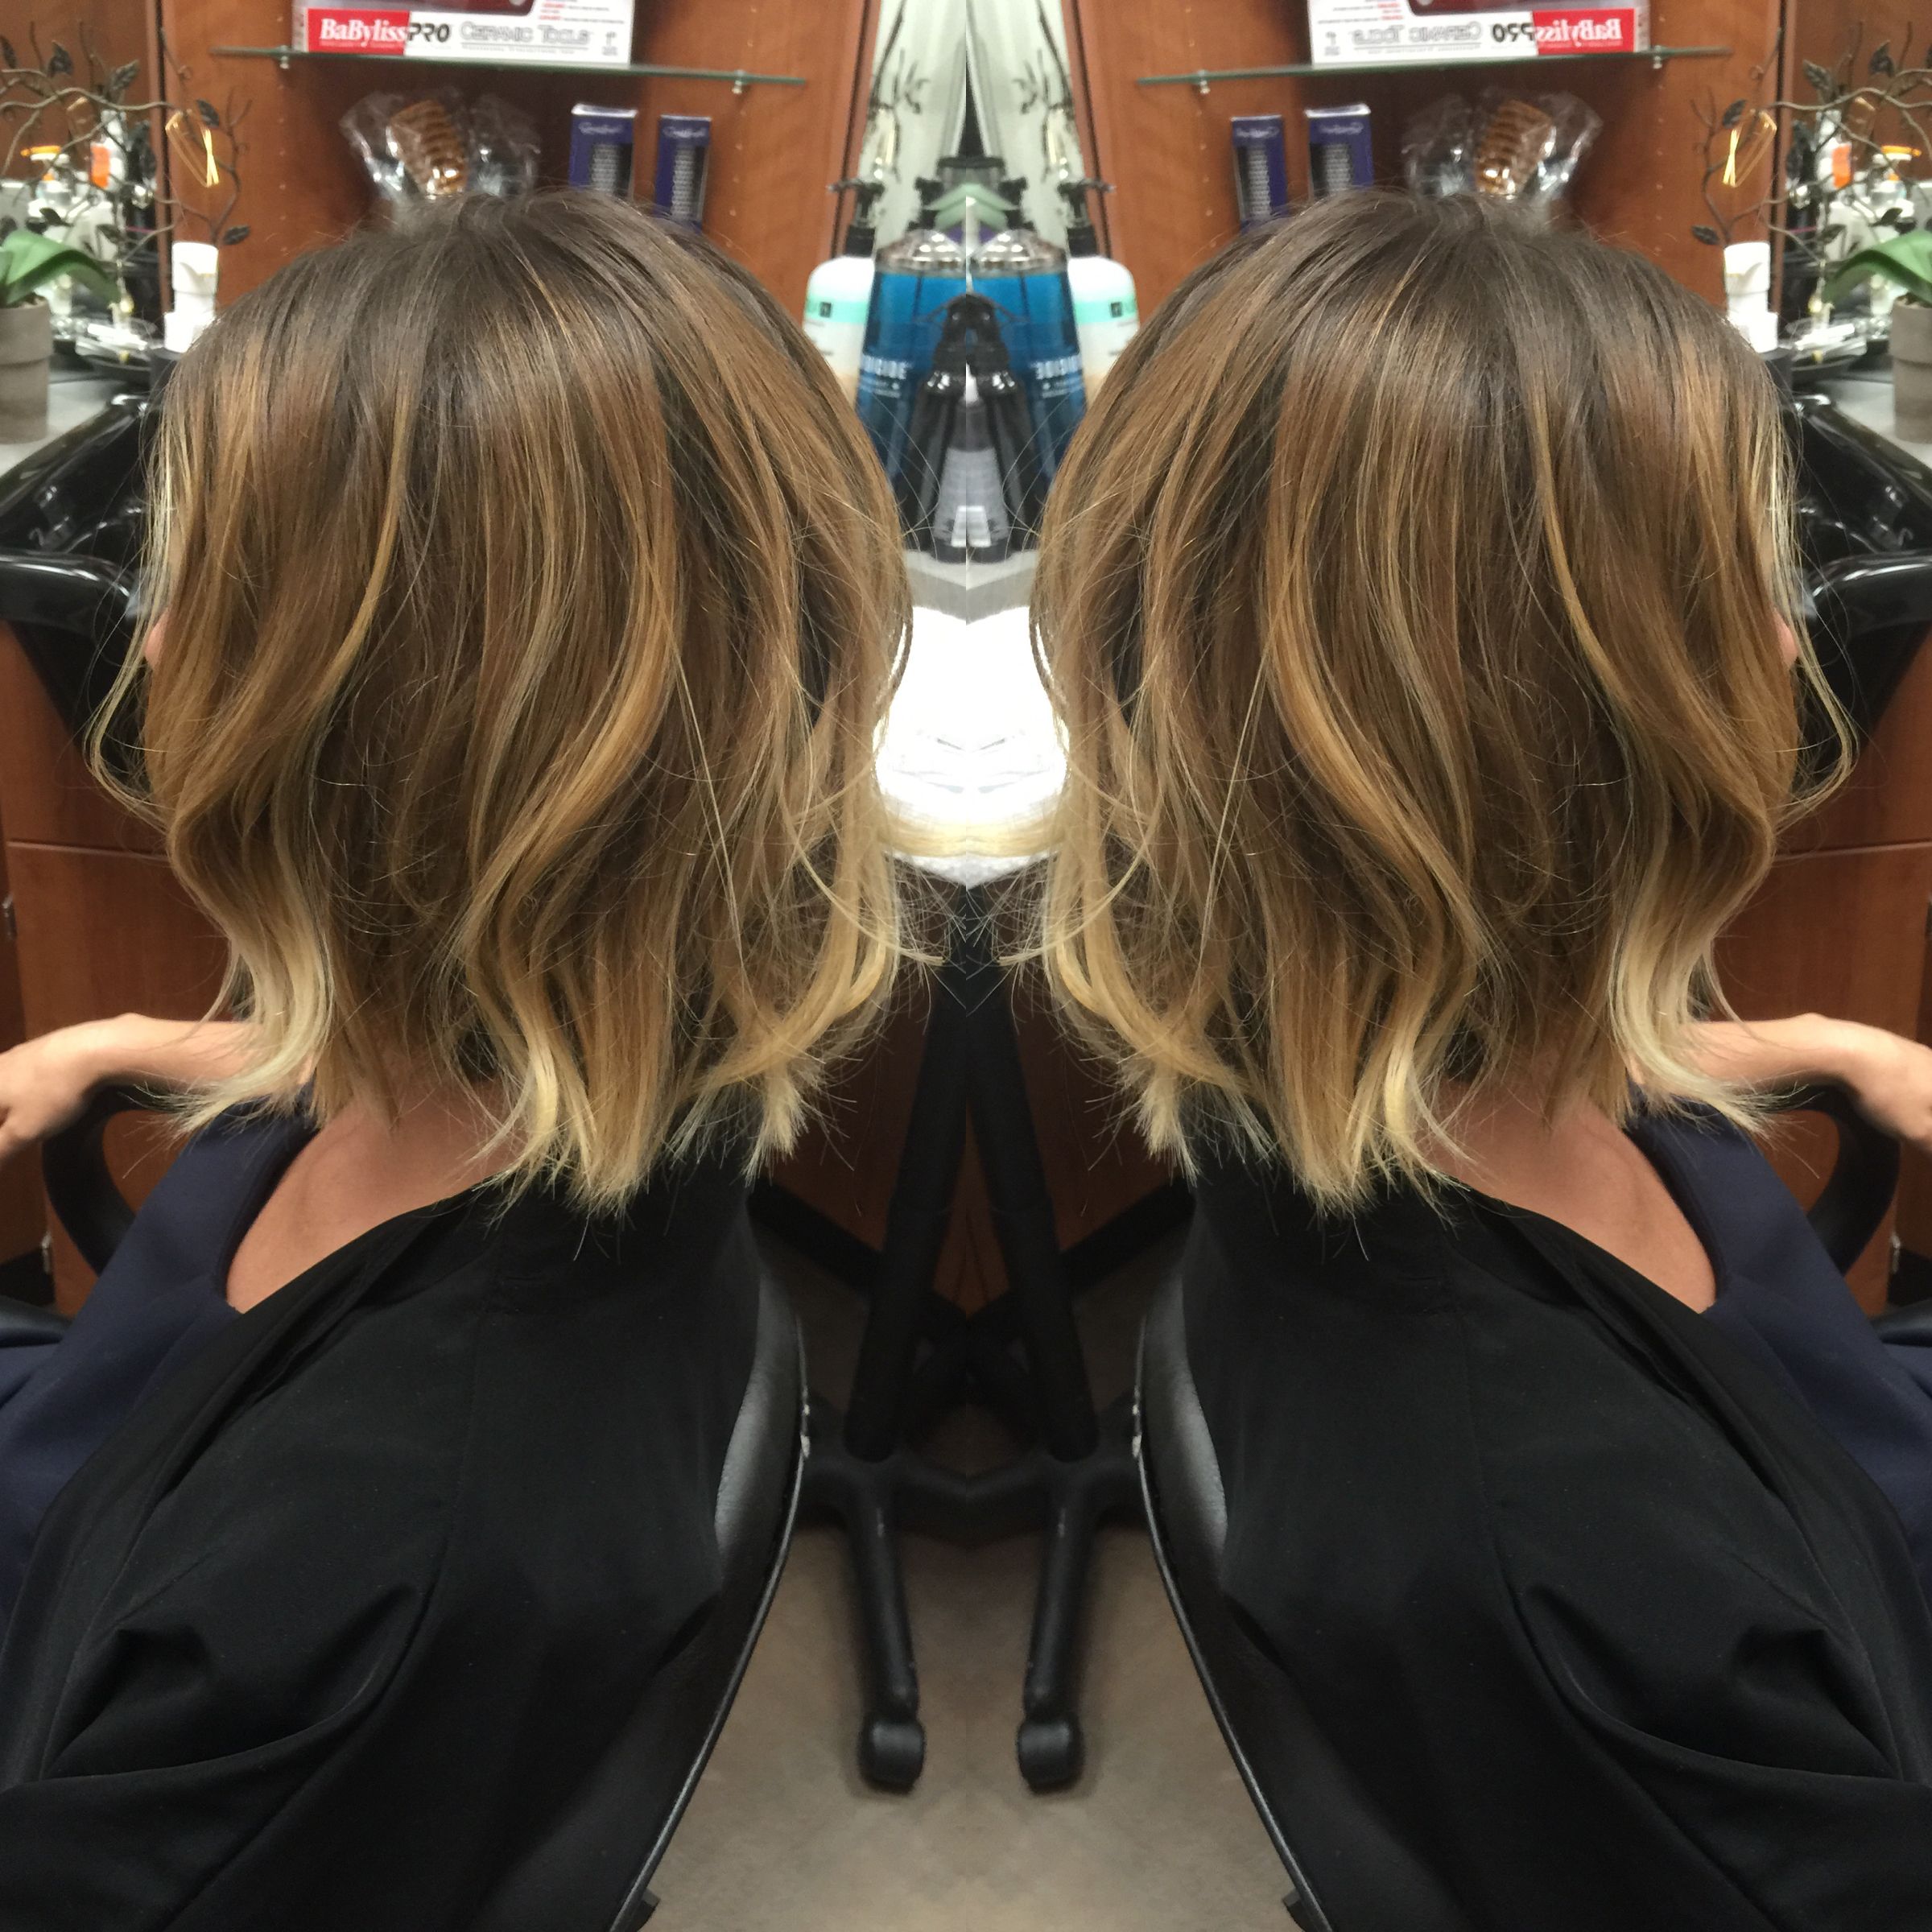 Redlands Hair Stylist Choppy Graduated Classic A Line Bob Natural Intended For Choppy Golden Blonde Balayage Bob Hairstyles (View 18 of 20)